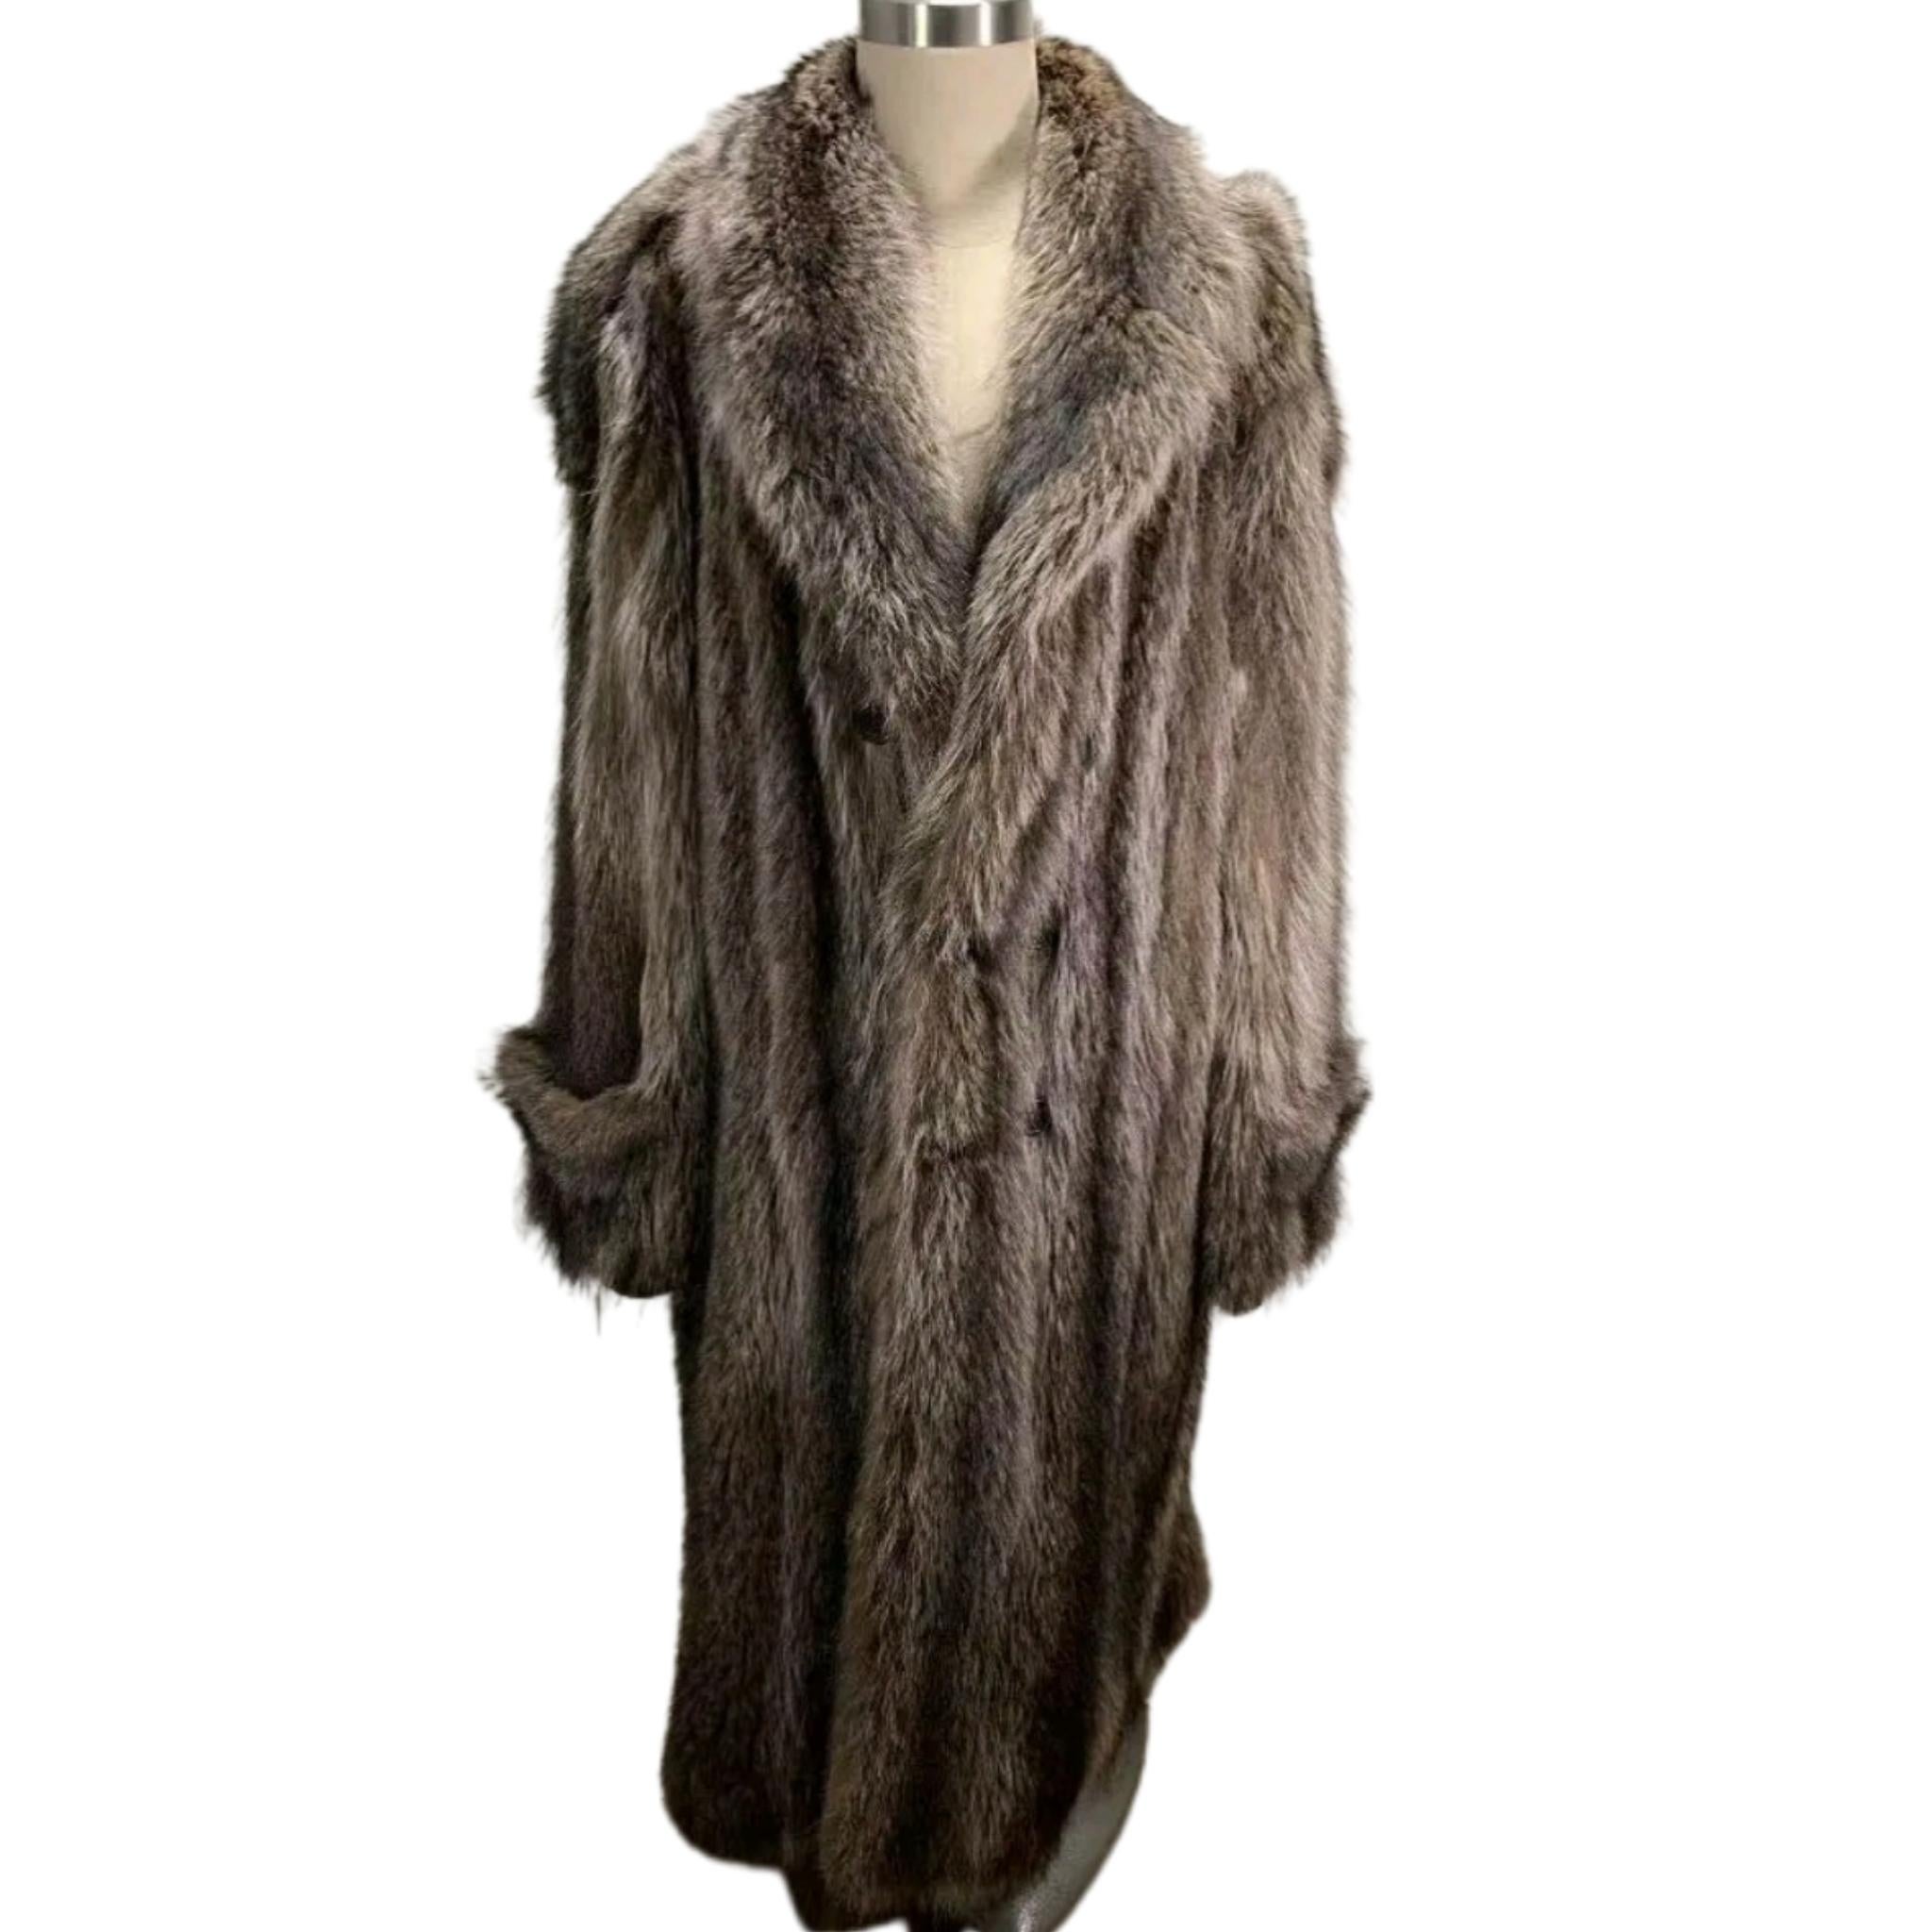 PRODUCT DESCRIPTION:

Brand new luxurious men's Raccoon fur coat 

Condition: Brand New

Closure: button 

Color: browns grays

Material: Raccoon

Garment type: Coat

Sleeves: Straight

Pockets: Two pockets

Collar: Notch

Lining: Shirred Silk